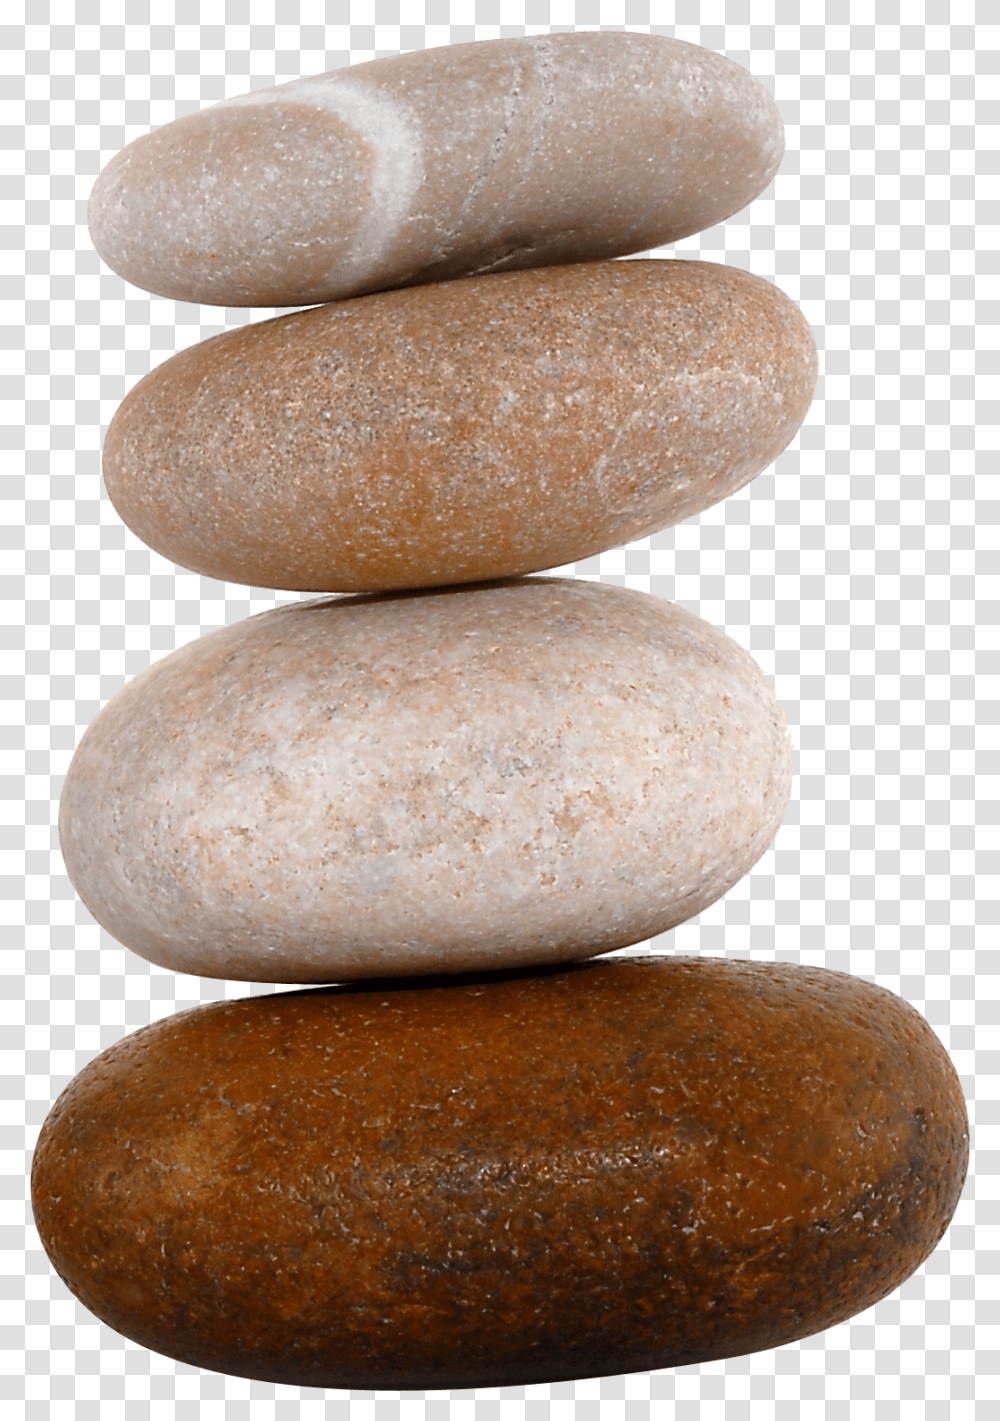 Now You Can Download Stones And Rocks Icon Clipart Rocks Clipart, Bread, Food, Pebble Transparent Png